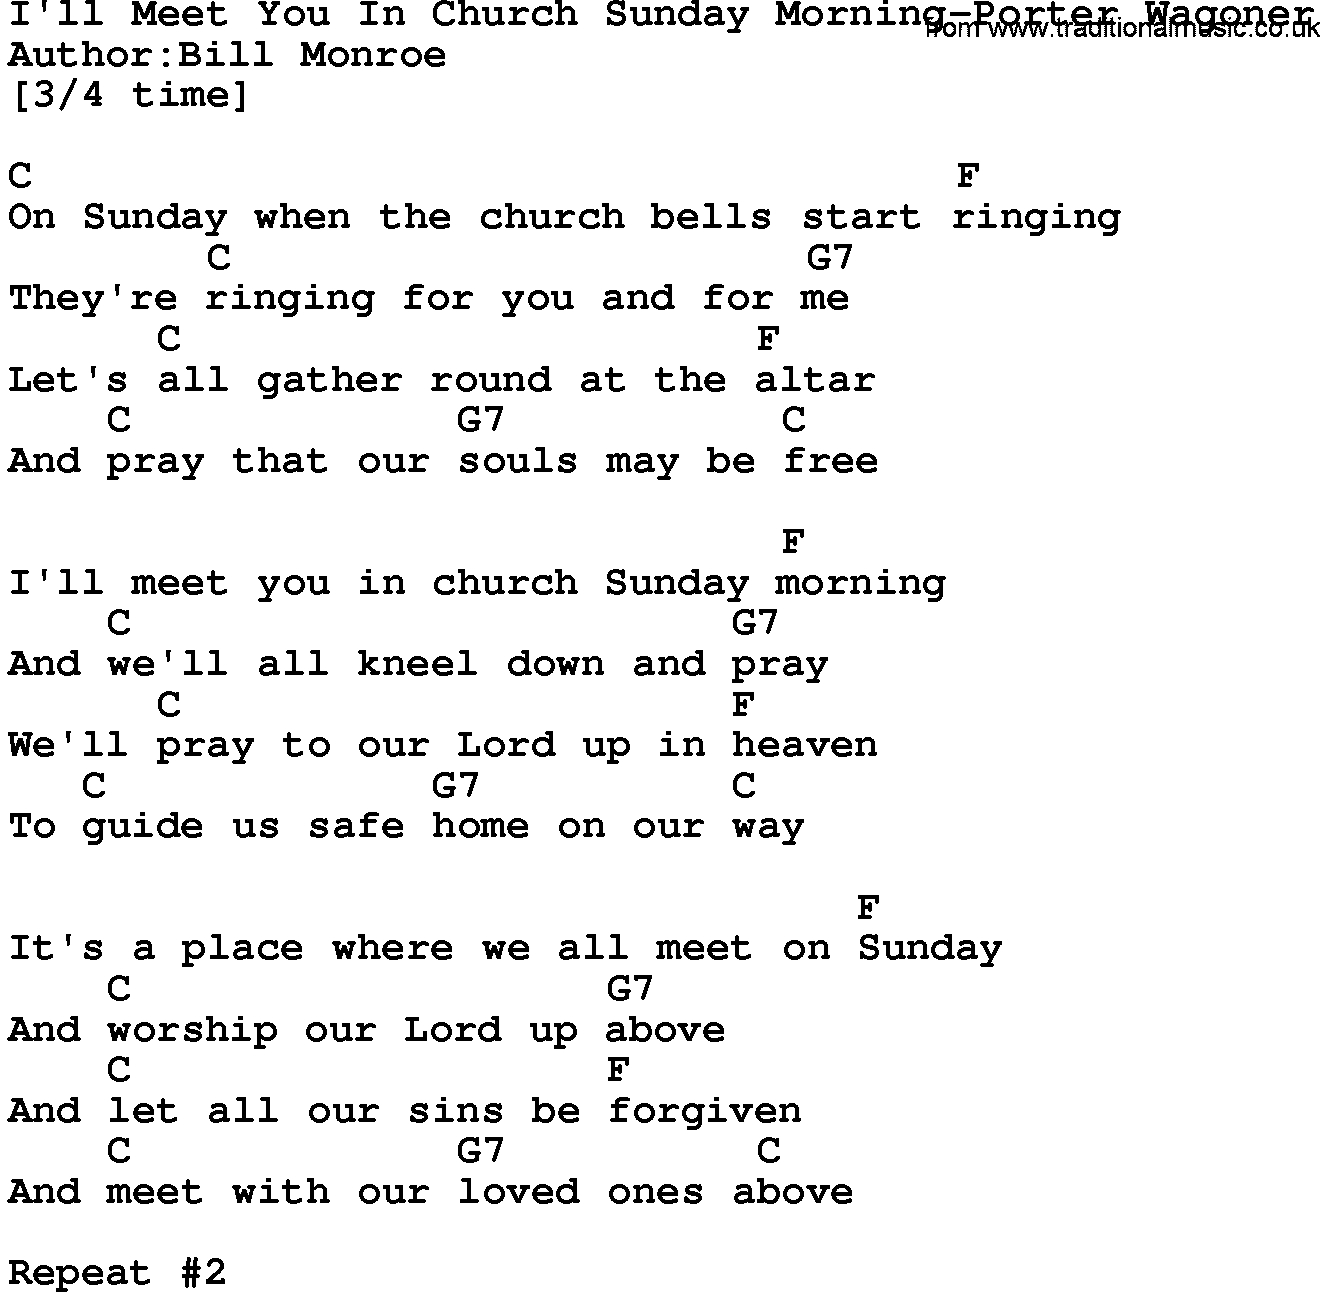 Sunday Morning Chords Country Musicill Meet You In Church Sunday Morning Porter Wagoner